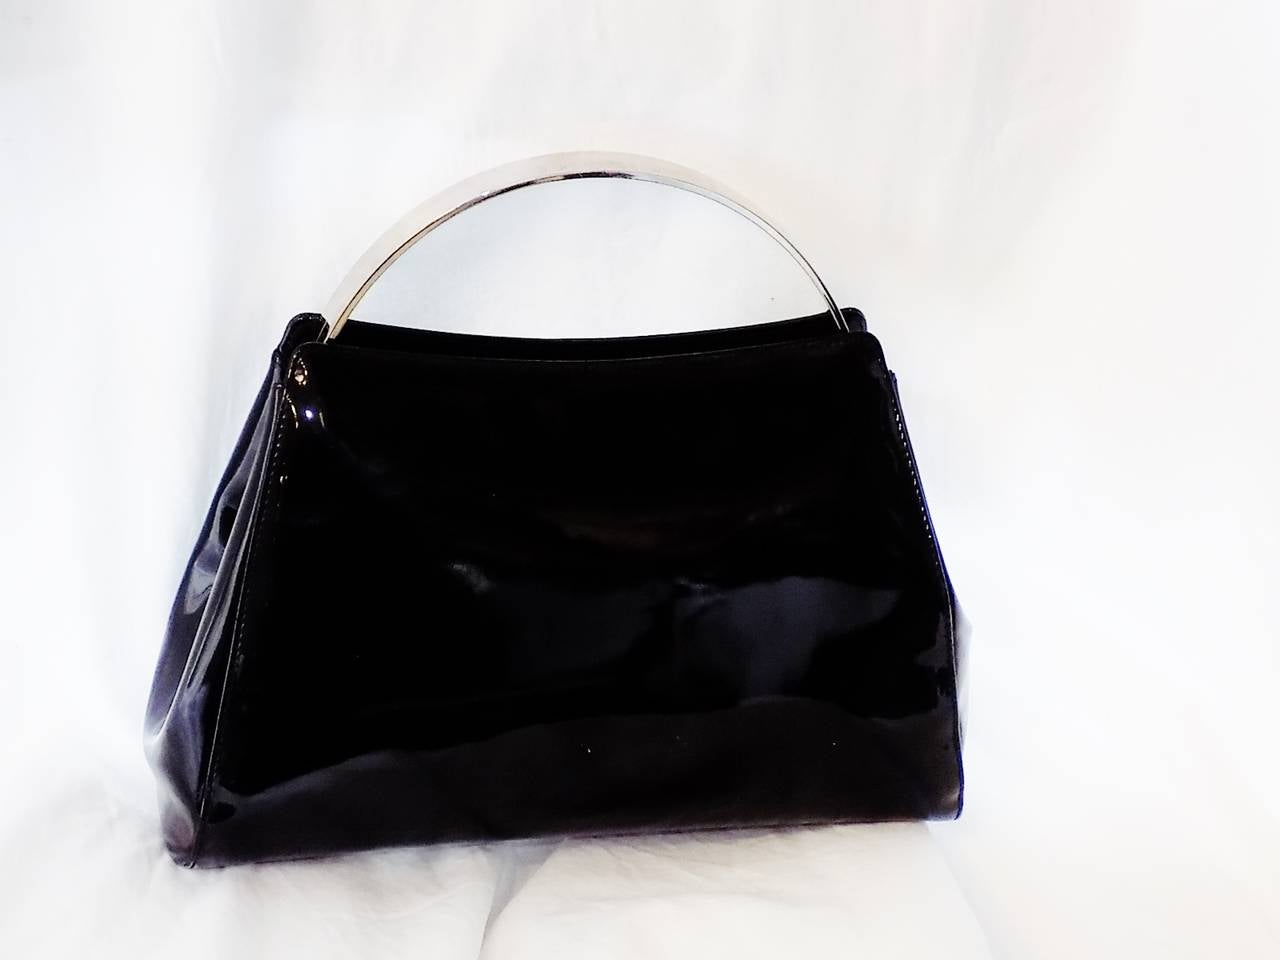 Beautiful Vintage black patent leather dinner bag. Silver hard frame with hard half moon handles featuring engraved CHANEL lettering. . CC logo at the front. 
Black leather lined with one inner zipper pocket and one side open pocket. Pristine